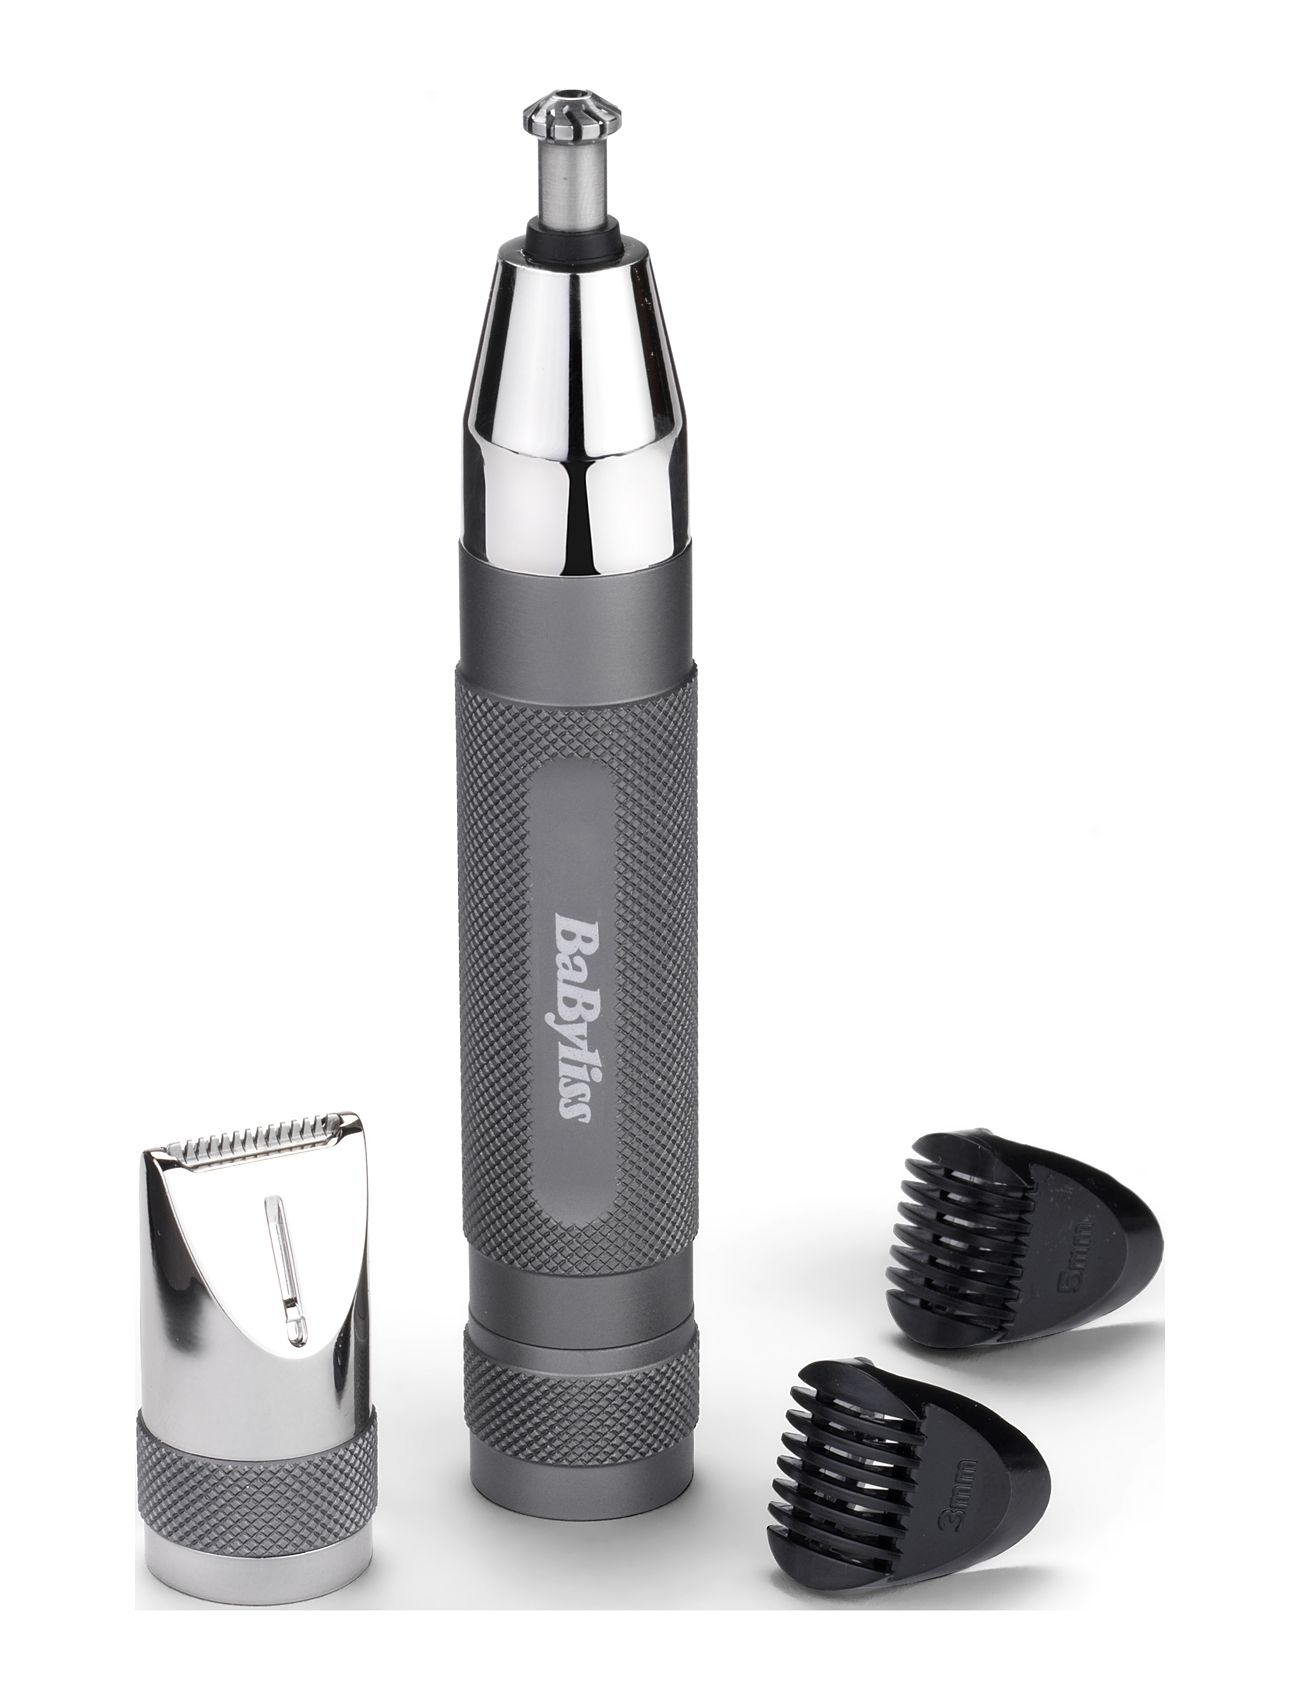 Super X Metal Precision Trimmer Beauty Men Shaving Products Grey BaByliss